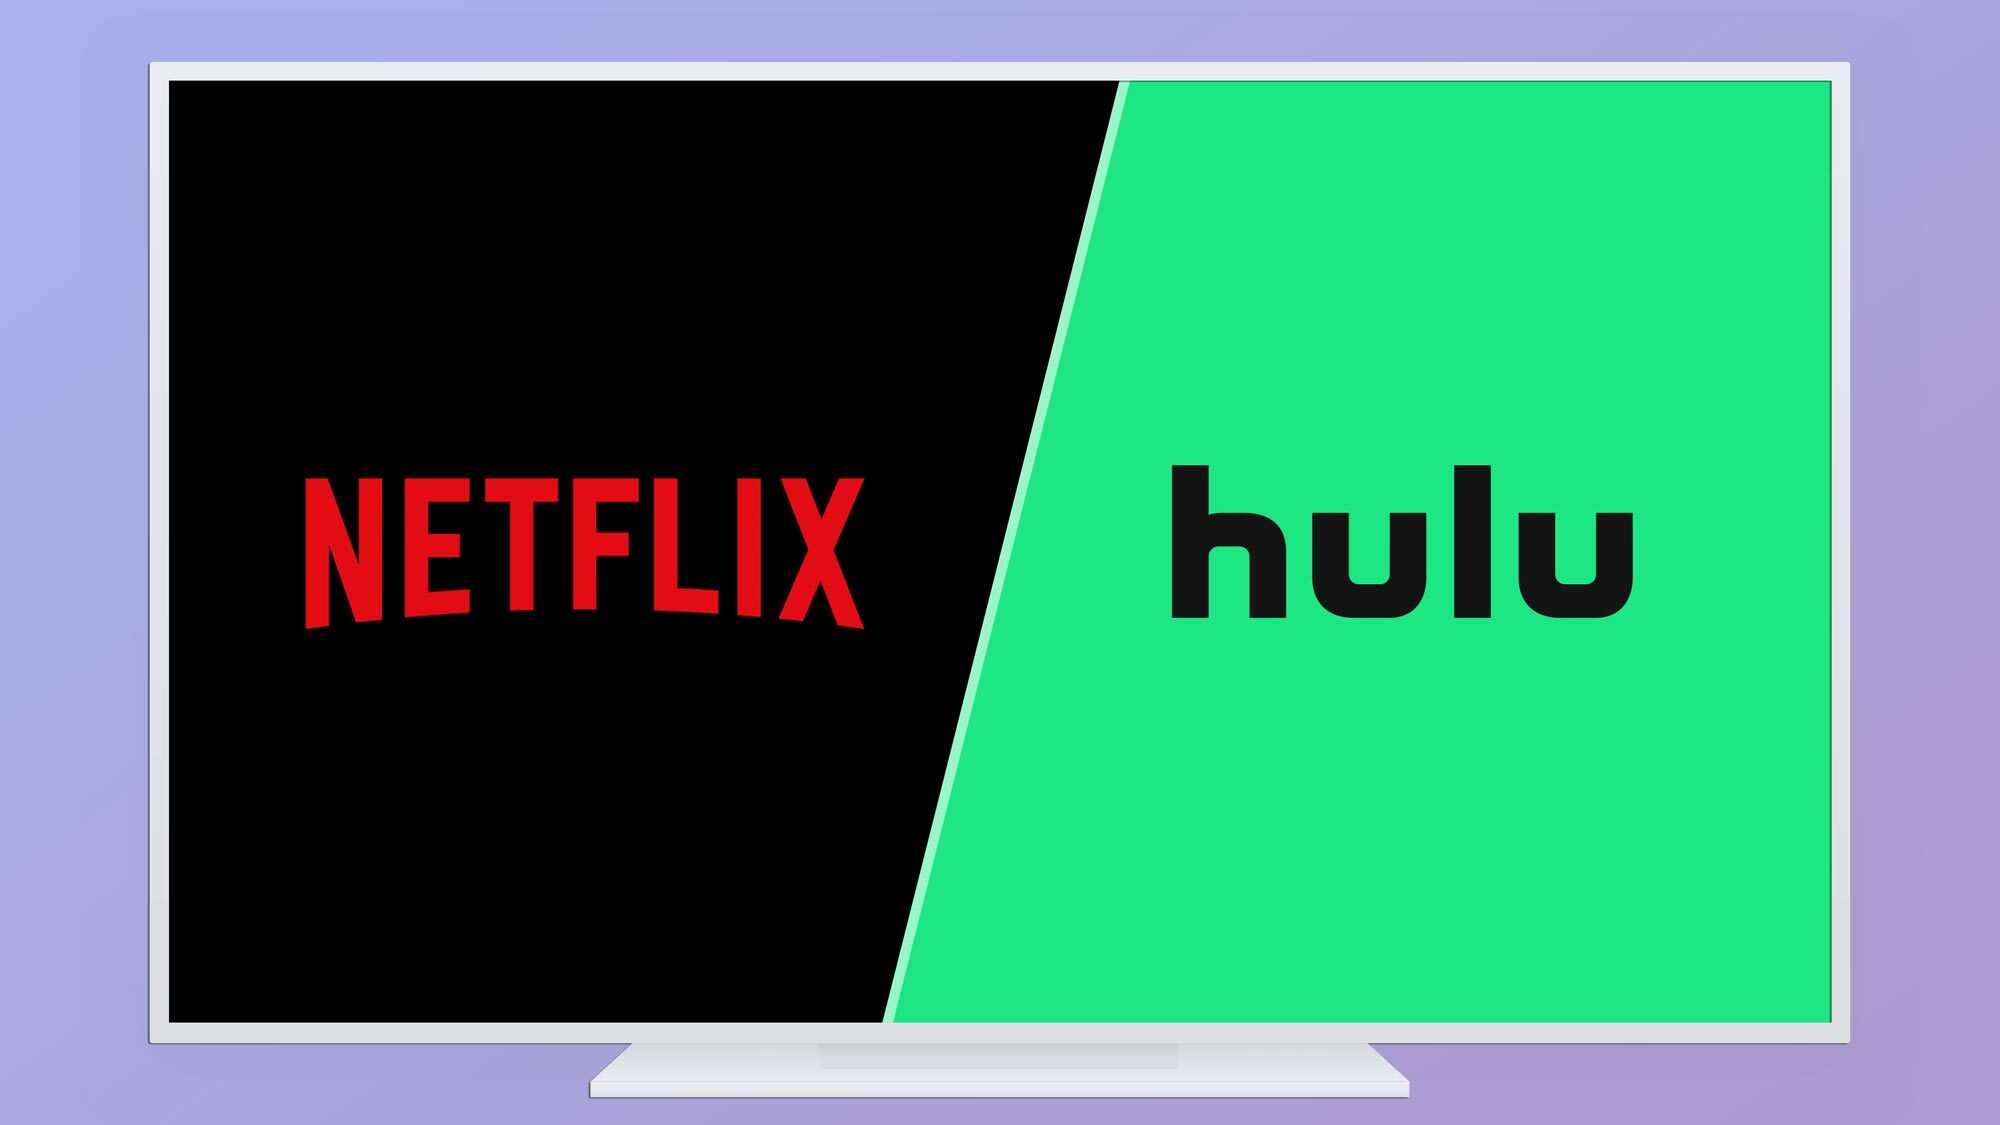 Netflix vs Hulu: Which streaming service is better? | Tom's Guide